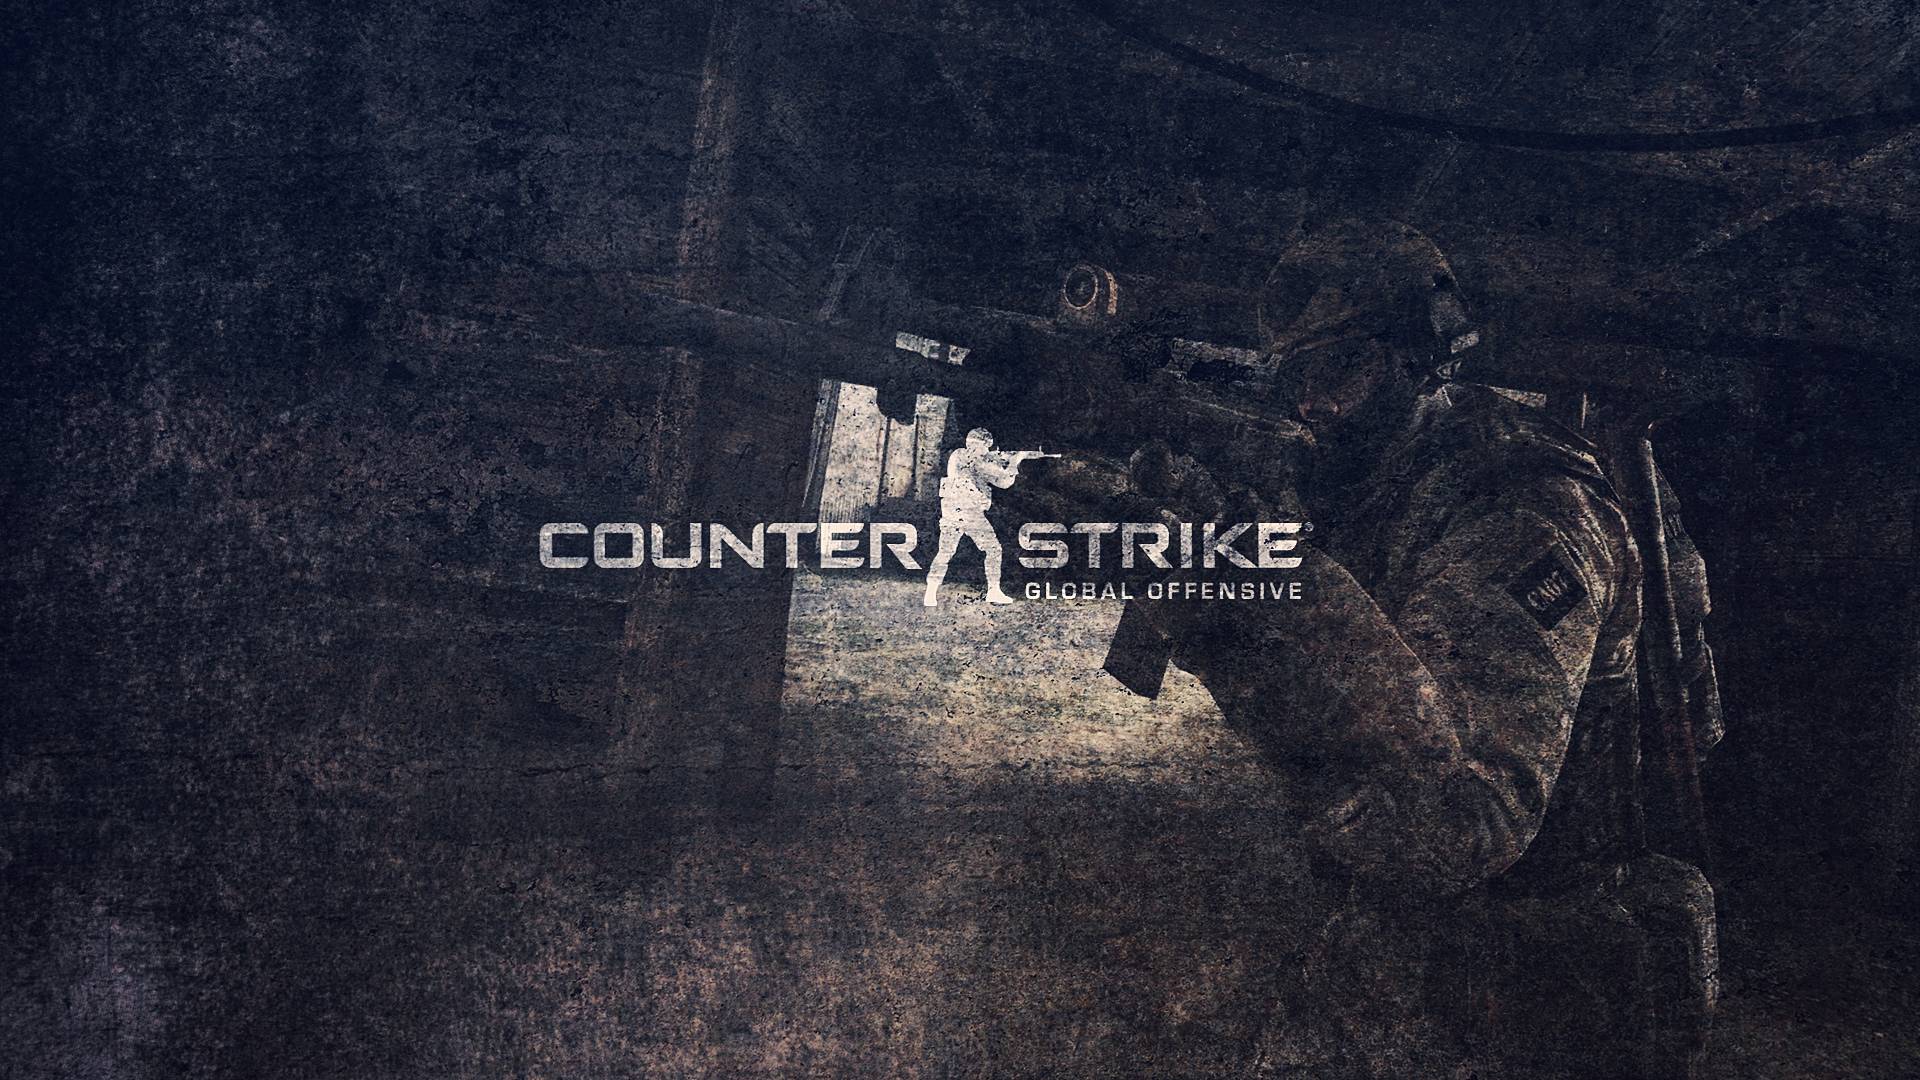 Counter Strike: Global Offensive Wallpaper HD 4 Gallery | Game